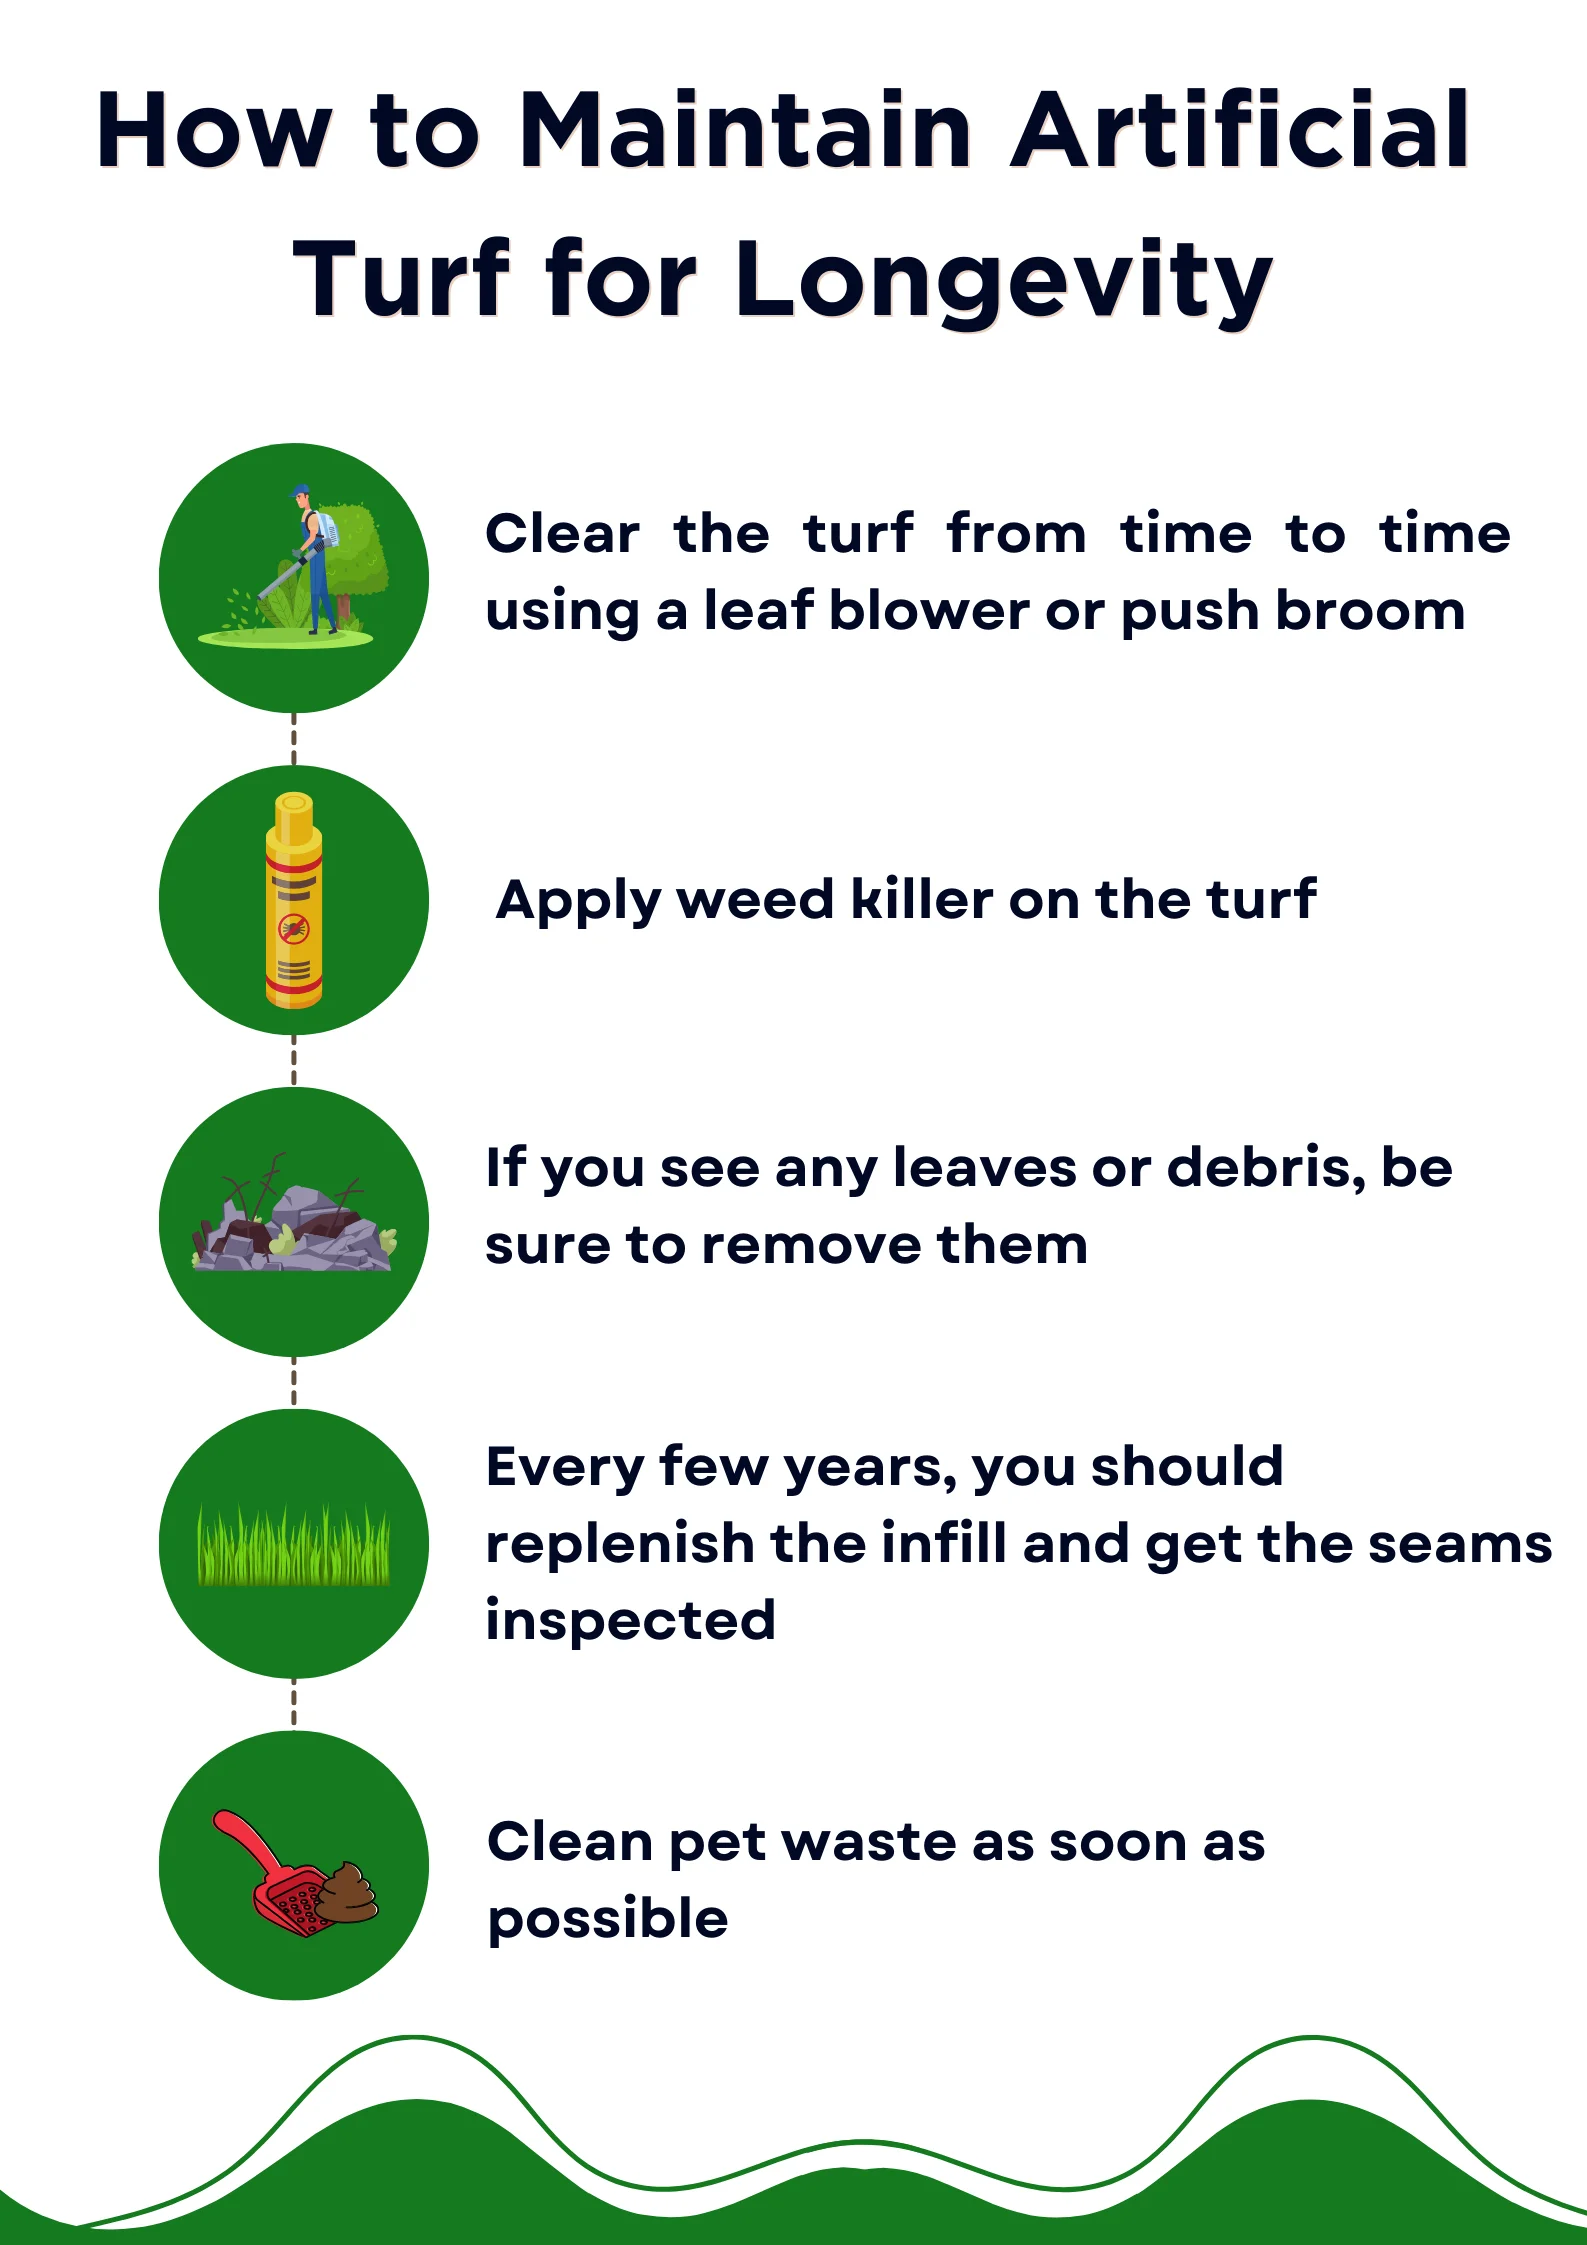 An infographic on how to maintain artificial turf